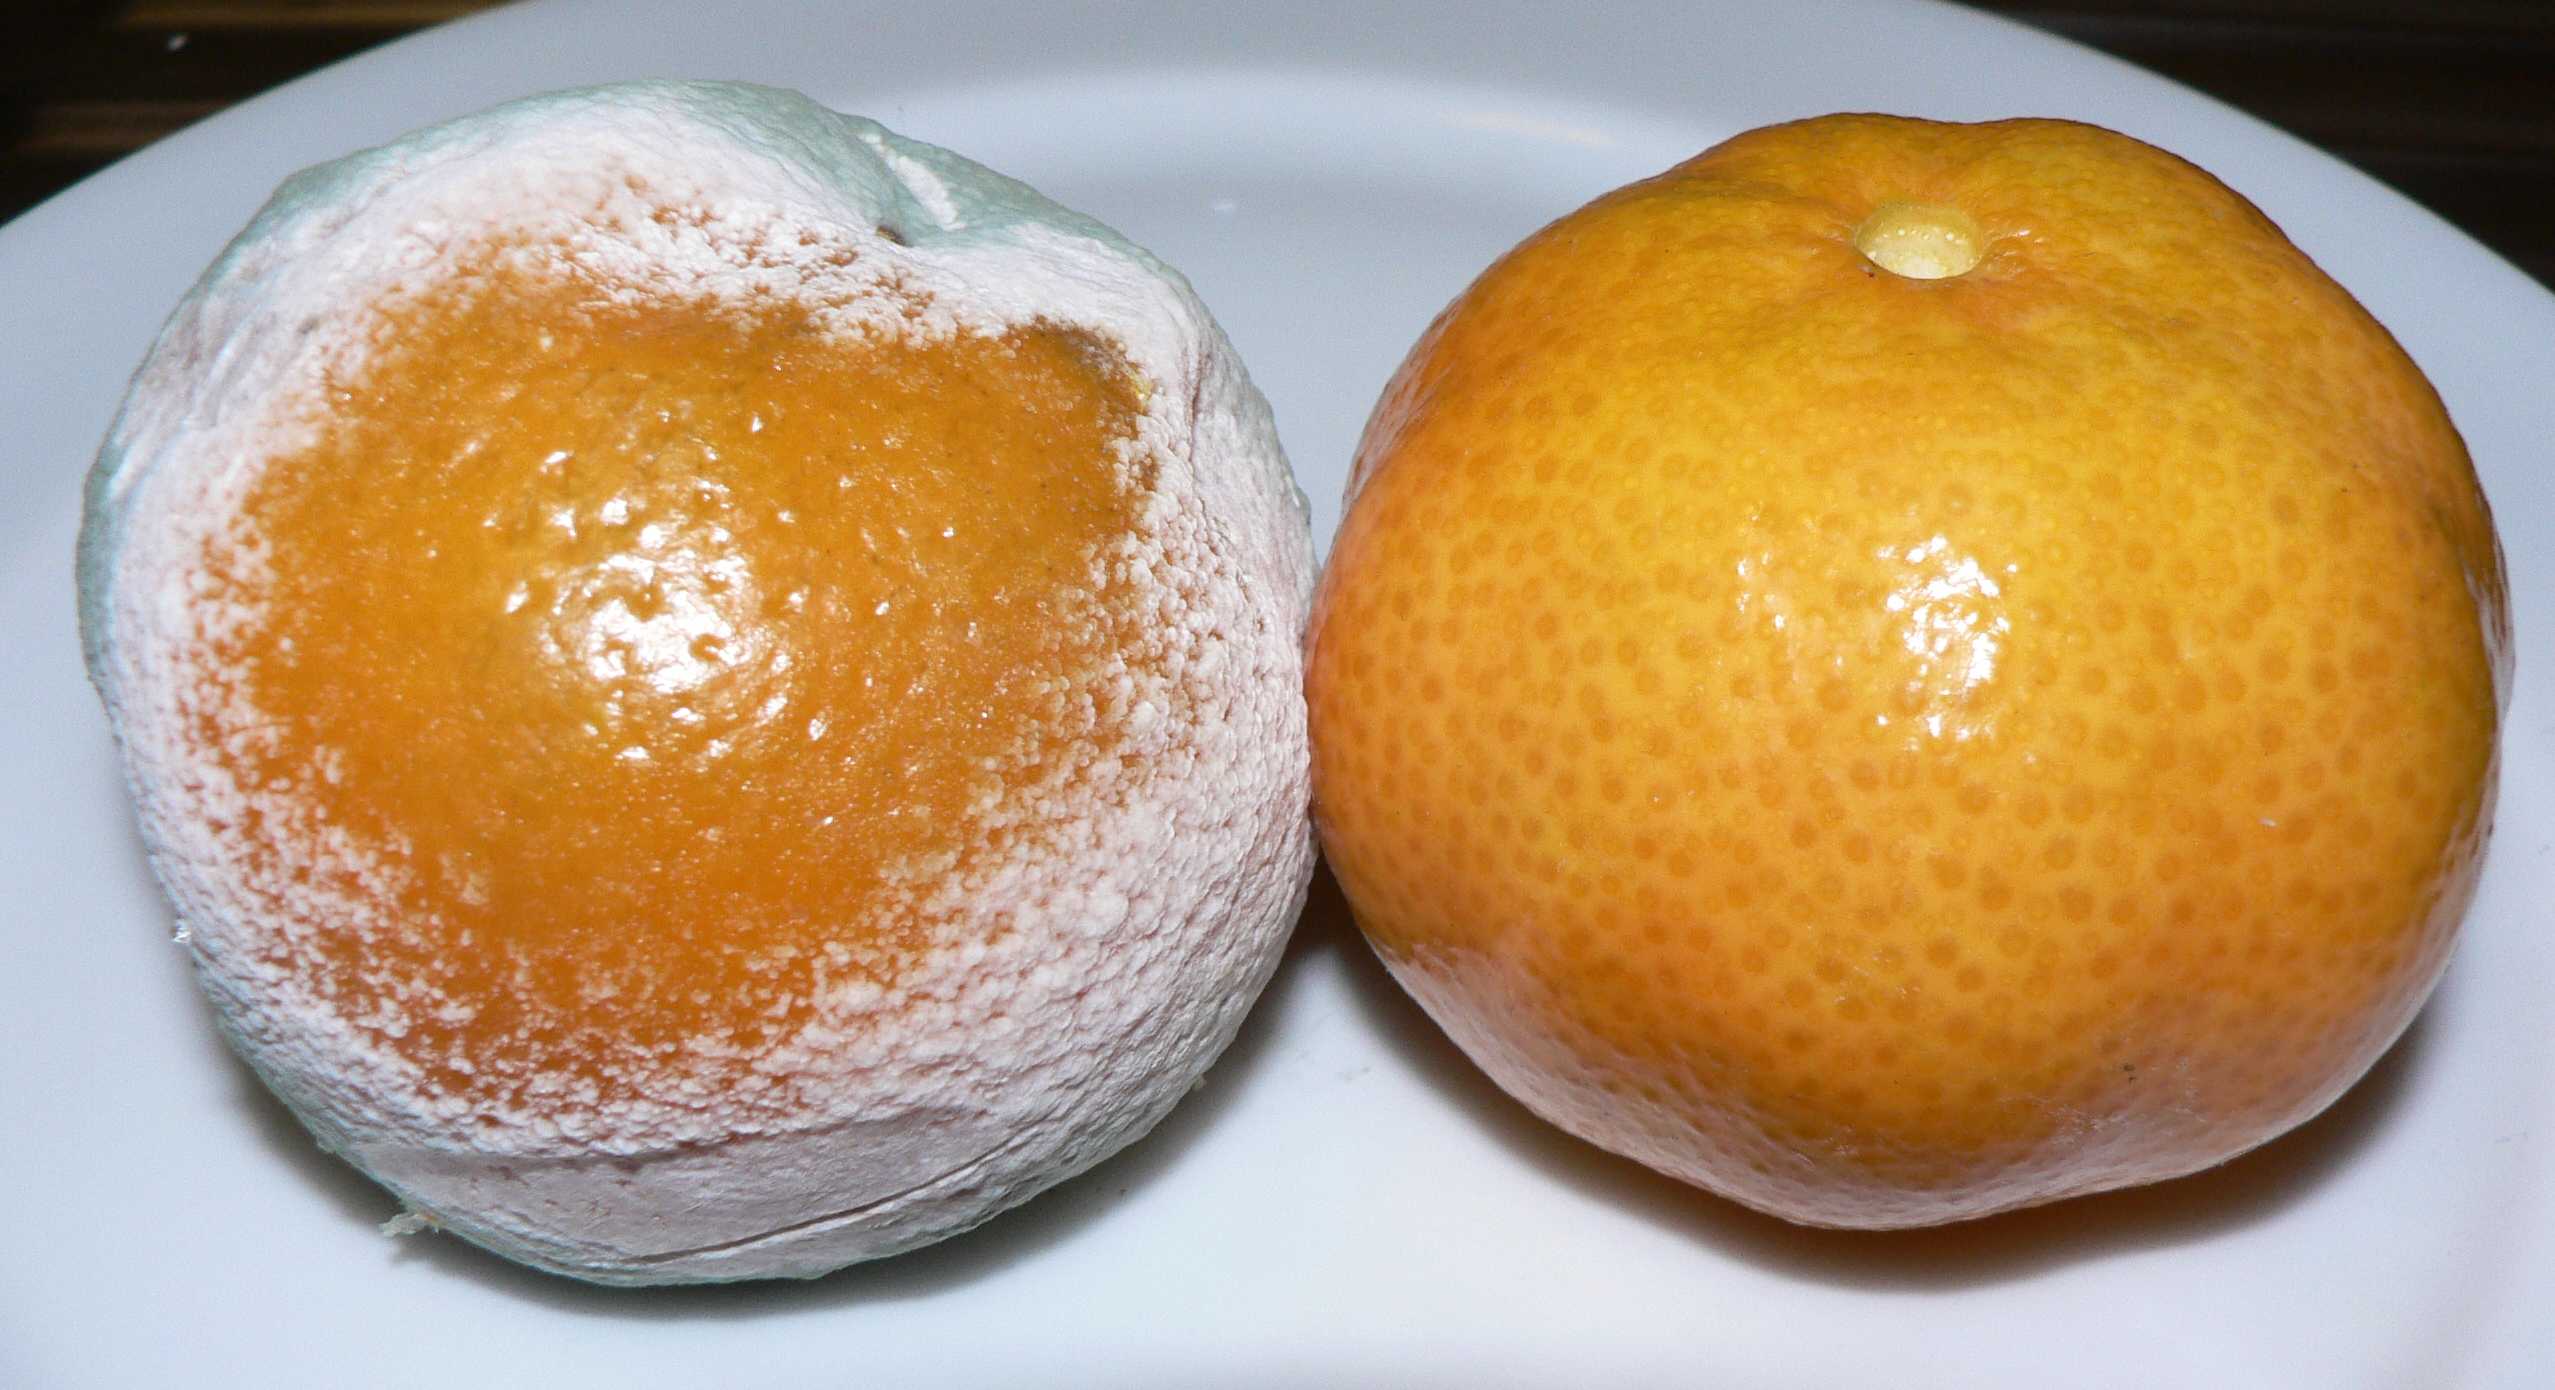 two tangerines, one covered with white and green mold